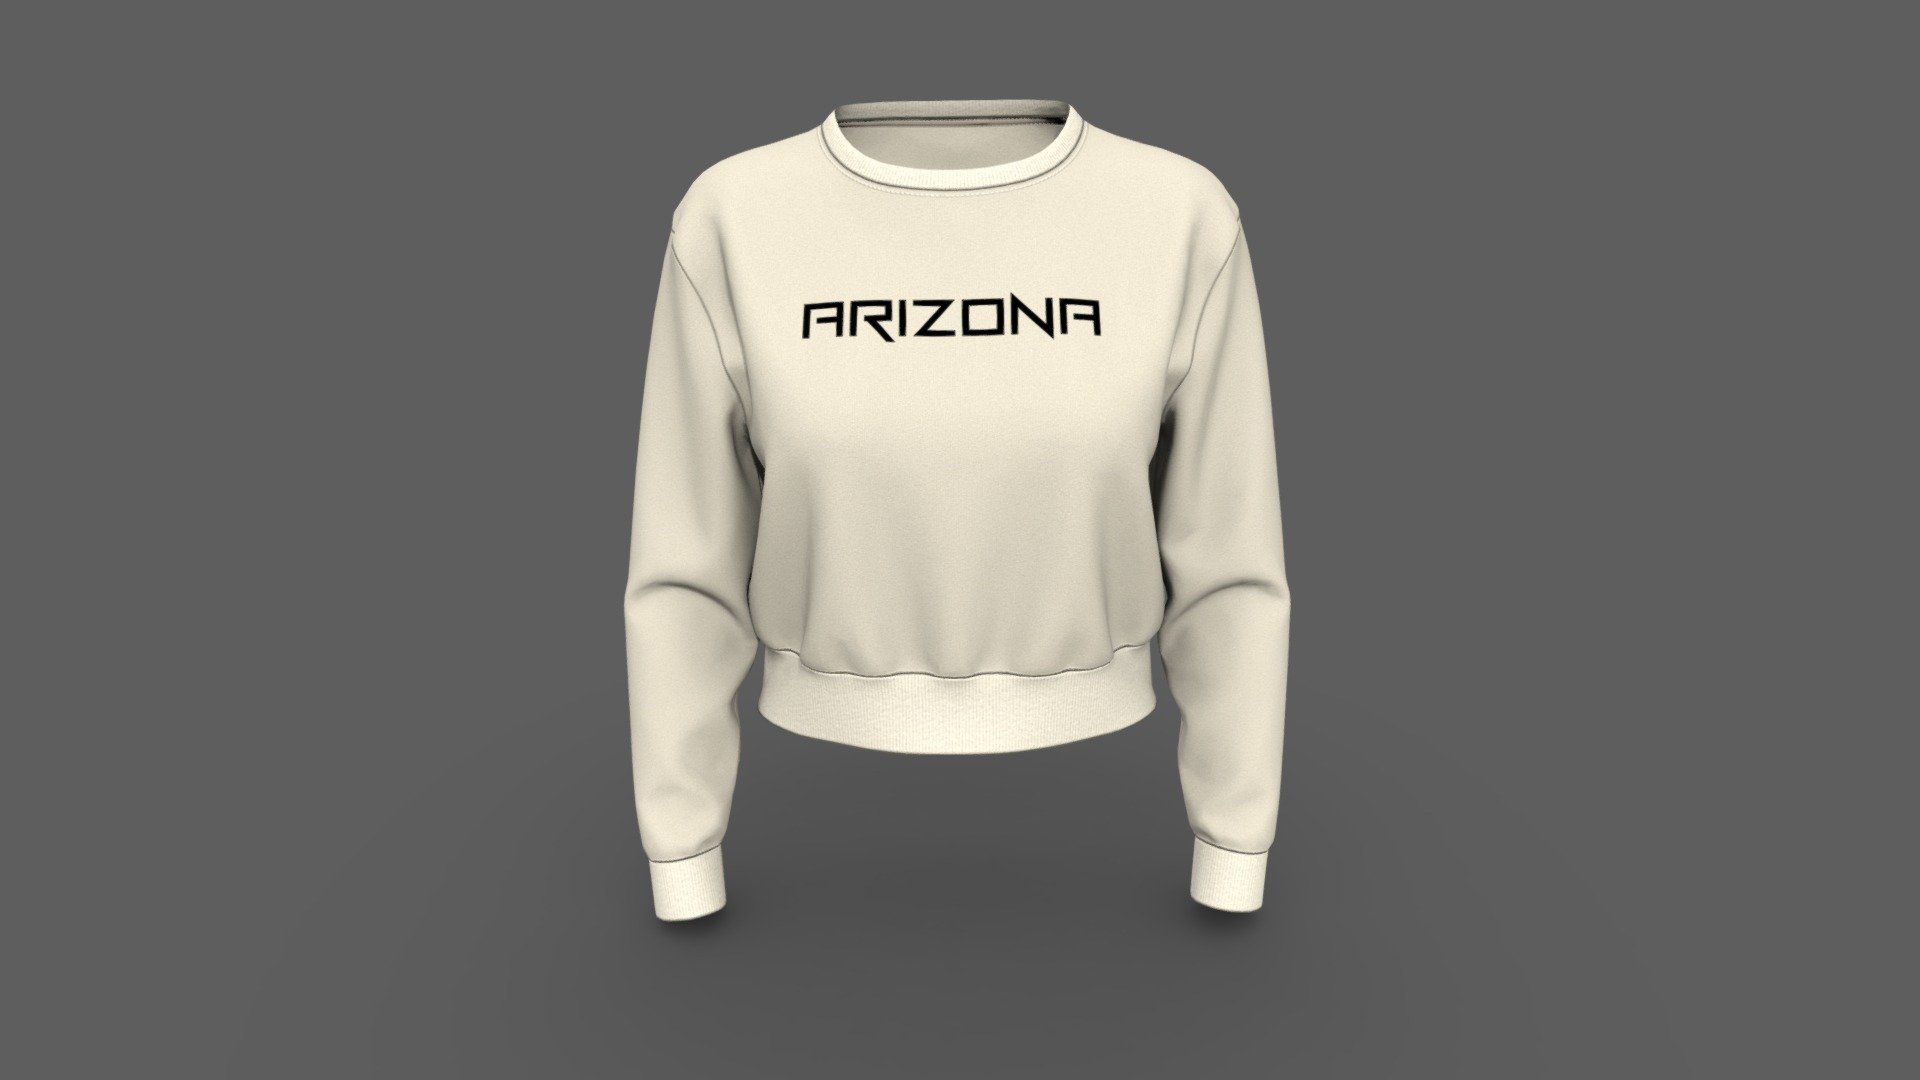 Chest Printed Women Sweatshirt
Version V1.0

Realistic high detailed Women Sweatshirt with high resolution textures. Model created by our unique processing &amp; Optimized for 3D web and AR / VR

SKU: BCVAR1070

Features

Optimized &amp; NON-Optimized obj model with 4K texture included




Optimized for AR/VR/MR

4K &amp; 2K fabric texture and details

Optimized model is 1.03MB

NON-Optimized model is 9.97MB

Knit fabric texture and print details included

GLB file in 2k texture size is 3.71MB

GLB file in 4k texture size is 16.7MB

Suitable for web application configurator development.

Fully unwrap UV

The model has 1 material

Includes high detailed normal map

Unit measurment was inch

Texture map: Base color, OcclusionRoughnessMetallic(ORM), Normal

NB: Tpose &amp; Apose Model available with request.

For more details or custom order send email: hello@binarycloth.com


Website:binarycloth.com - Chest Printed Women Sweatshirt - Buy Royalty Free 3D model by BINARYCLOTH (@binaryclothofficial) 3d model